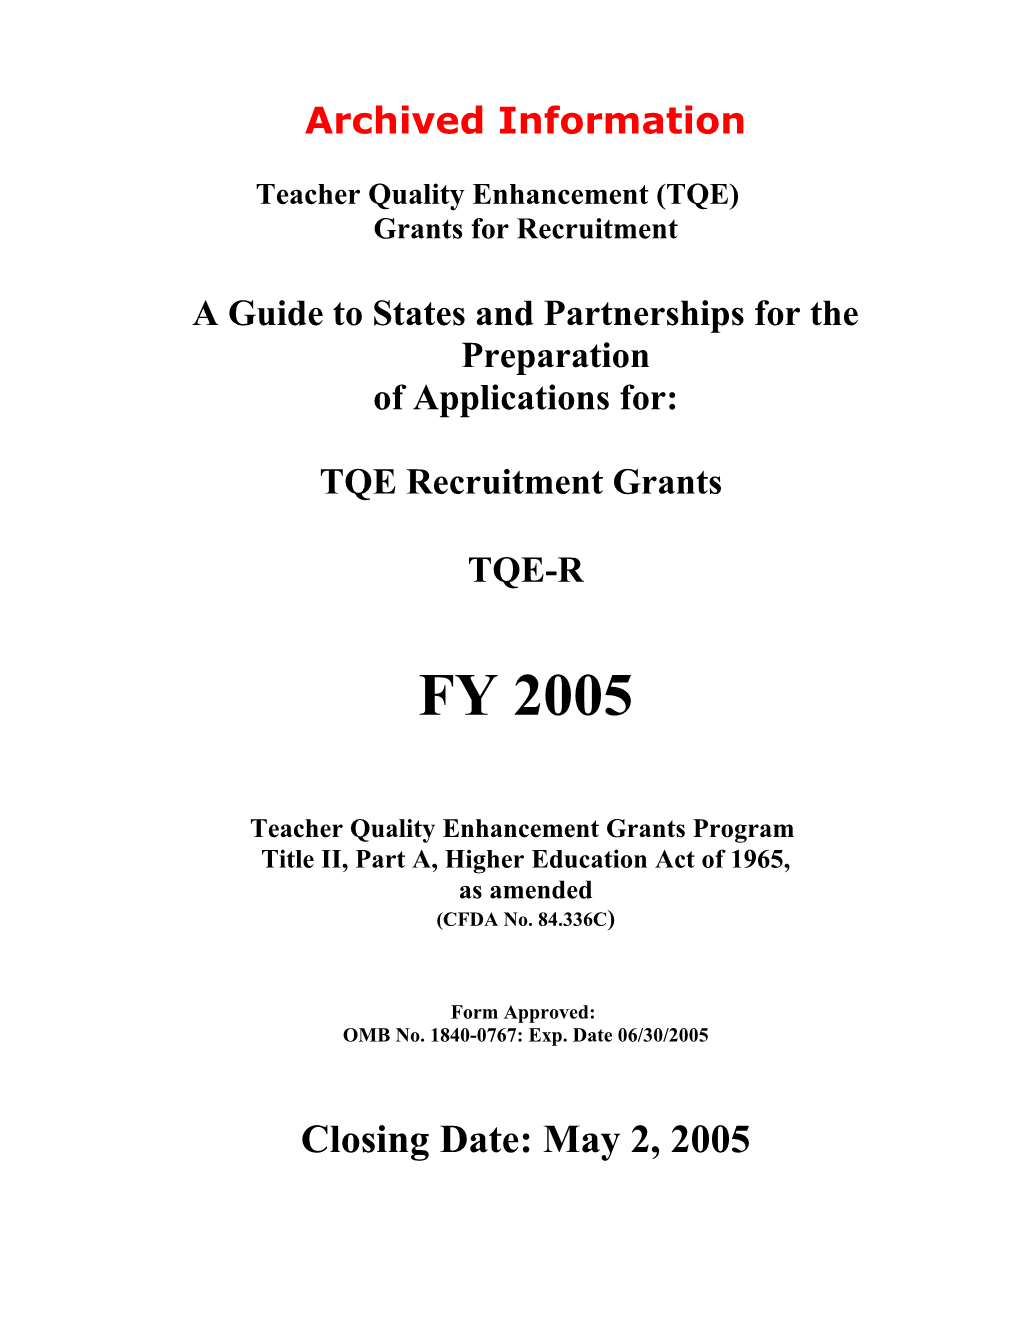 Archived: FY 2005 Application for Teacher Quality Enhancement Grants for Recruitment (MS Word)